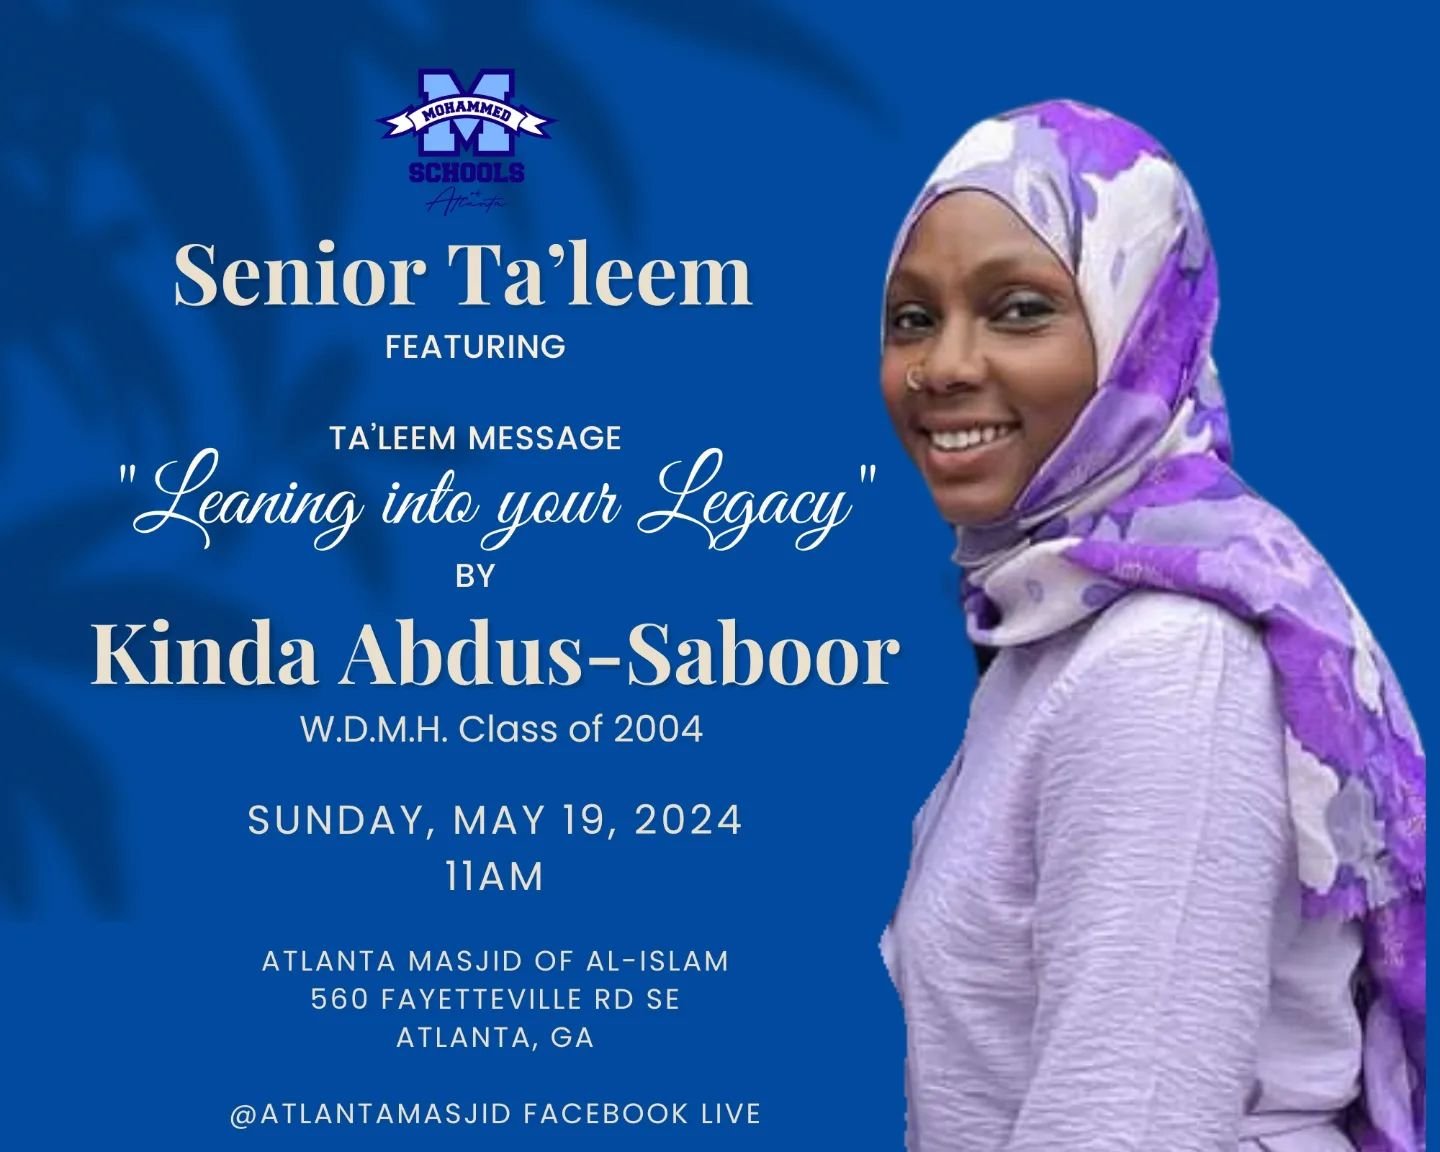 We welcome Alum Kinda Abdus-Saboor, WDMH Class of 2004, as the featured speaker at the Senior Ta'leem introducing the 2024 W. D. Mohammed High School graduates. Mrs. Abdus-Saboor, an attorney, professor, and one of our alumni couples, will talk about